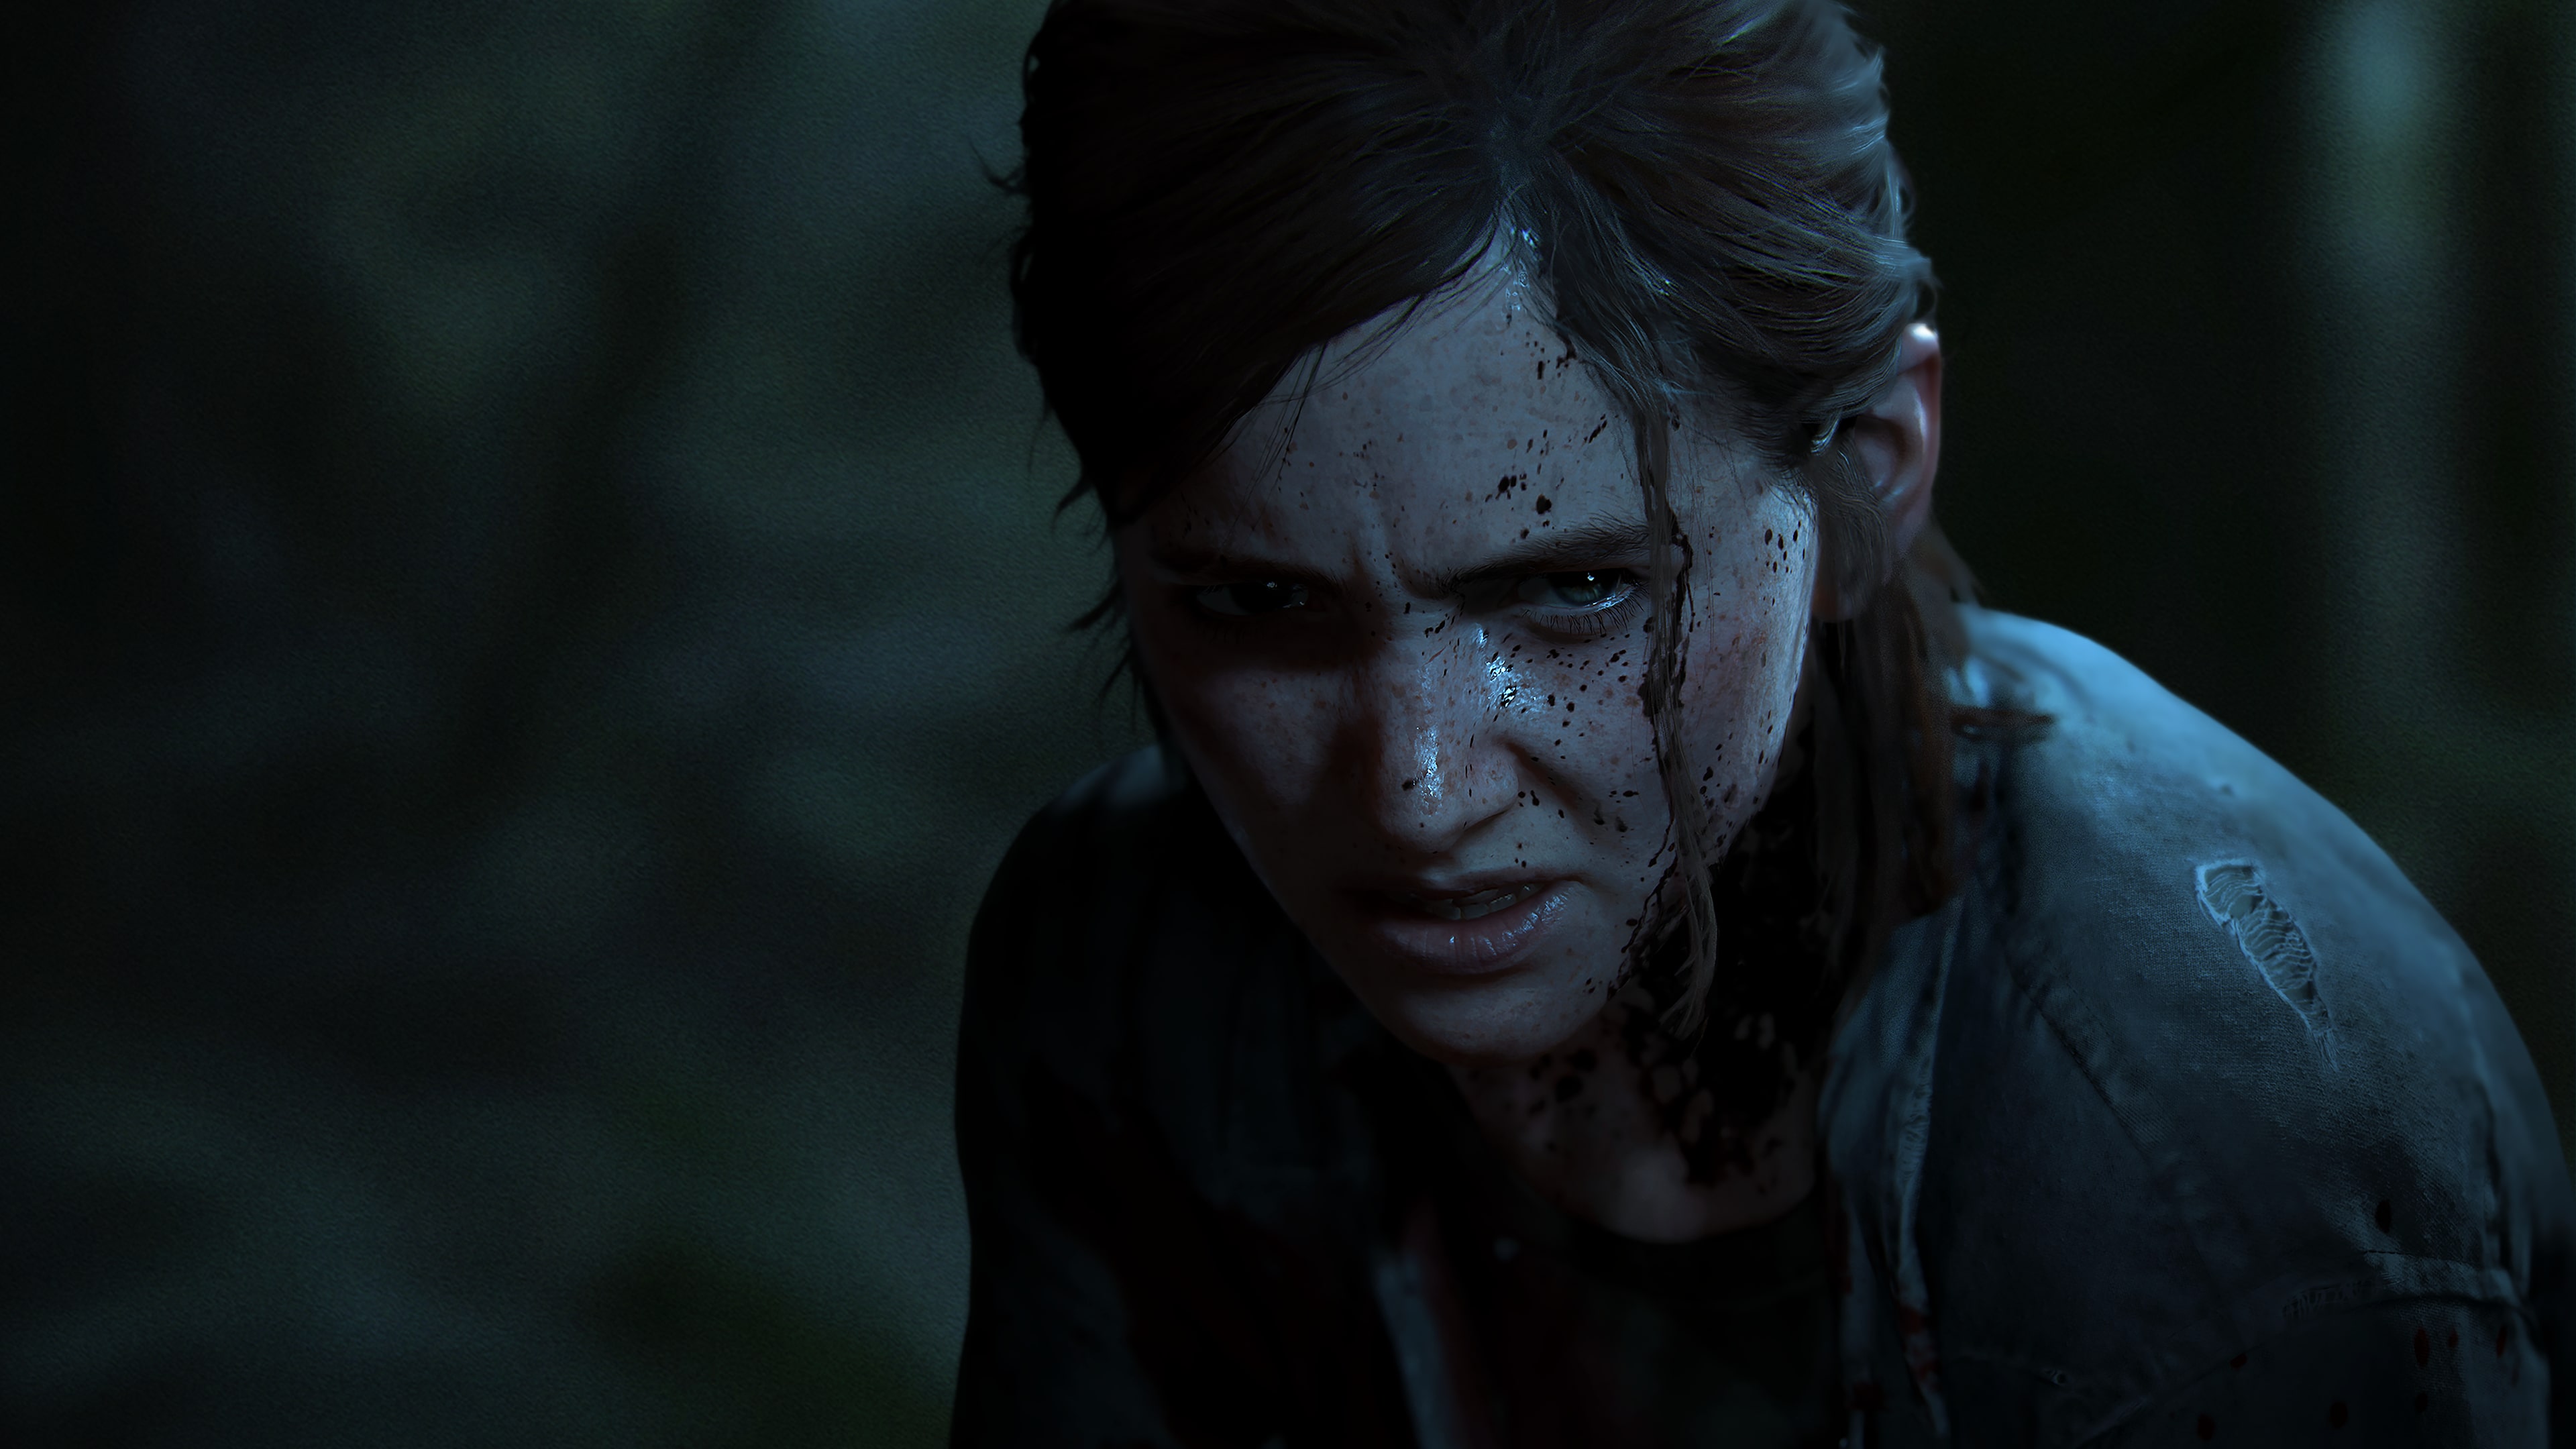 Ellie The Last Of Us Wallpapers - Wallpaper Cave